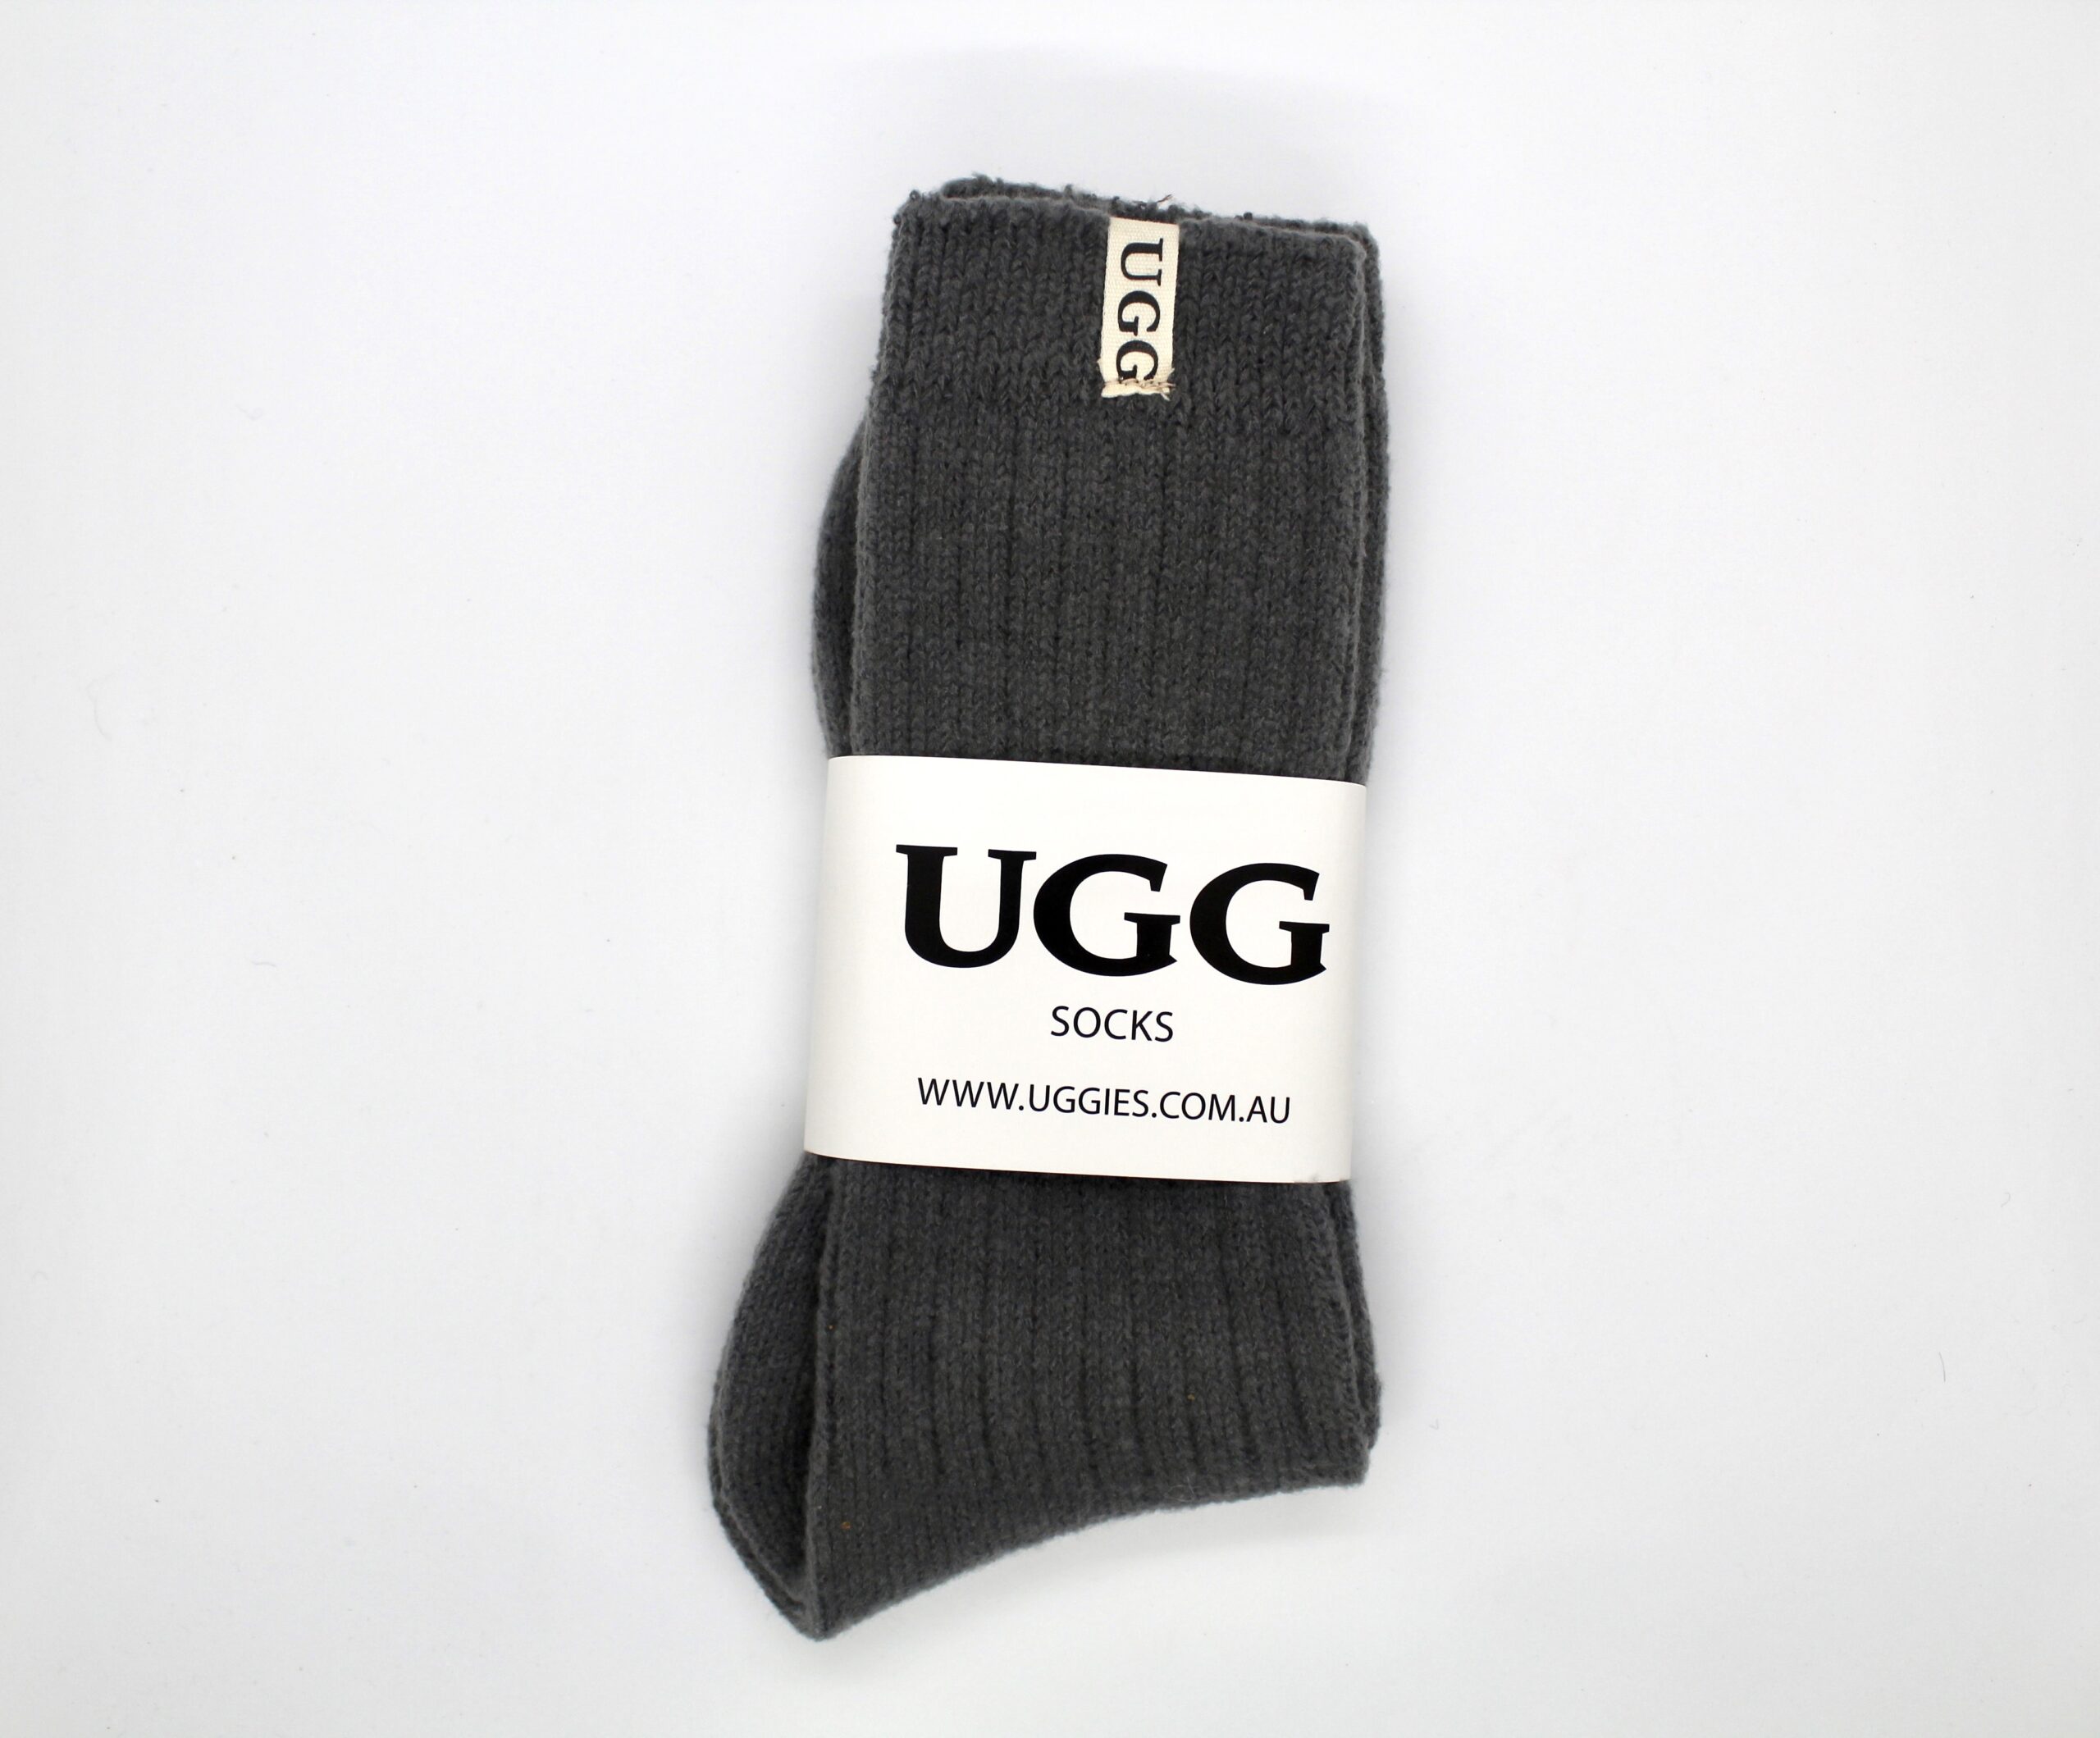 UGGIES | The One and Original Australian Based Manufactures